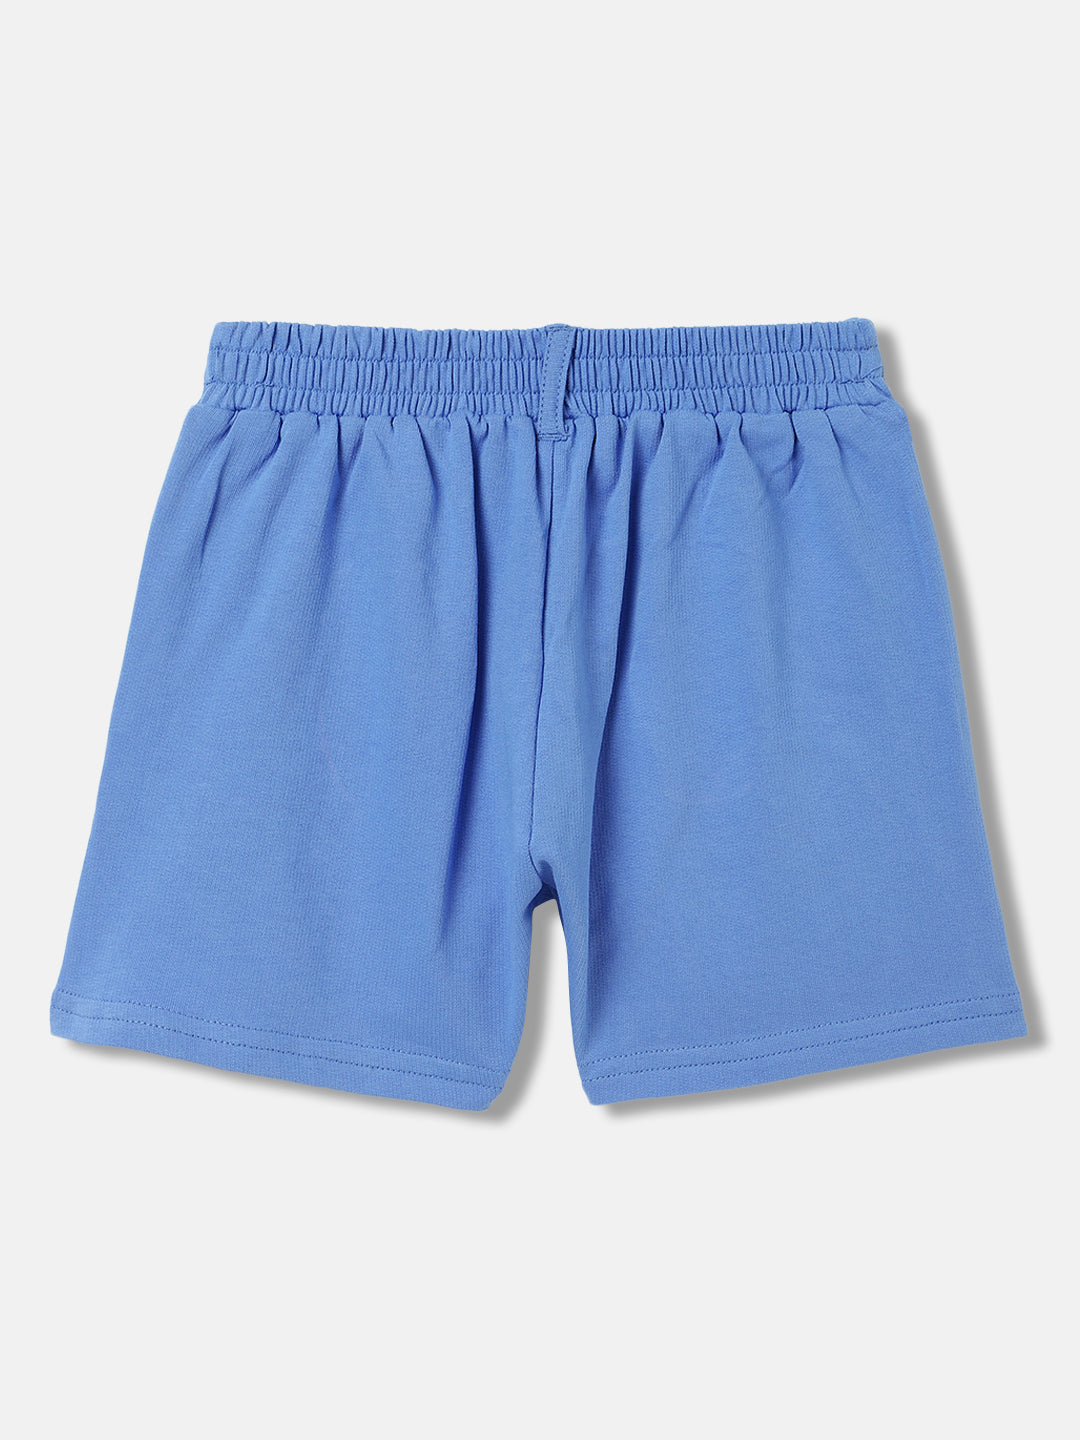 Elle Kids Girls Blue Solid Relaxed Fit Shorts